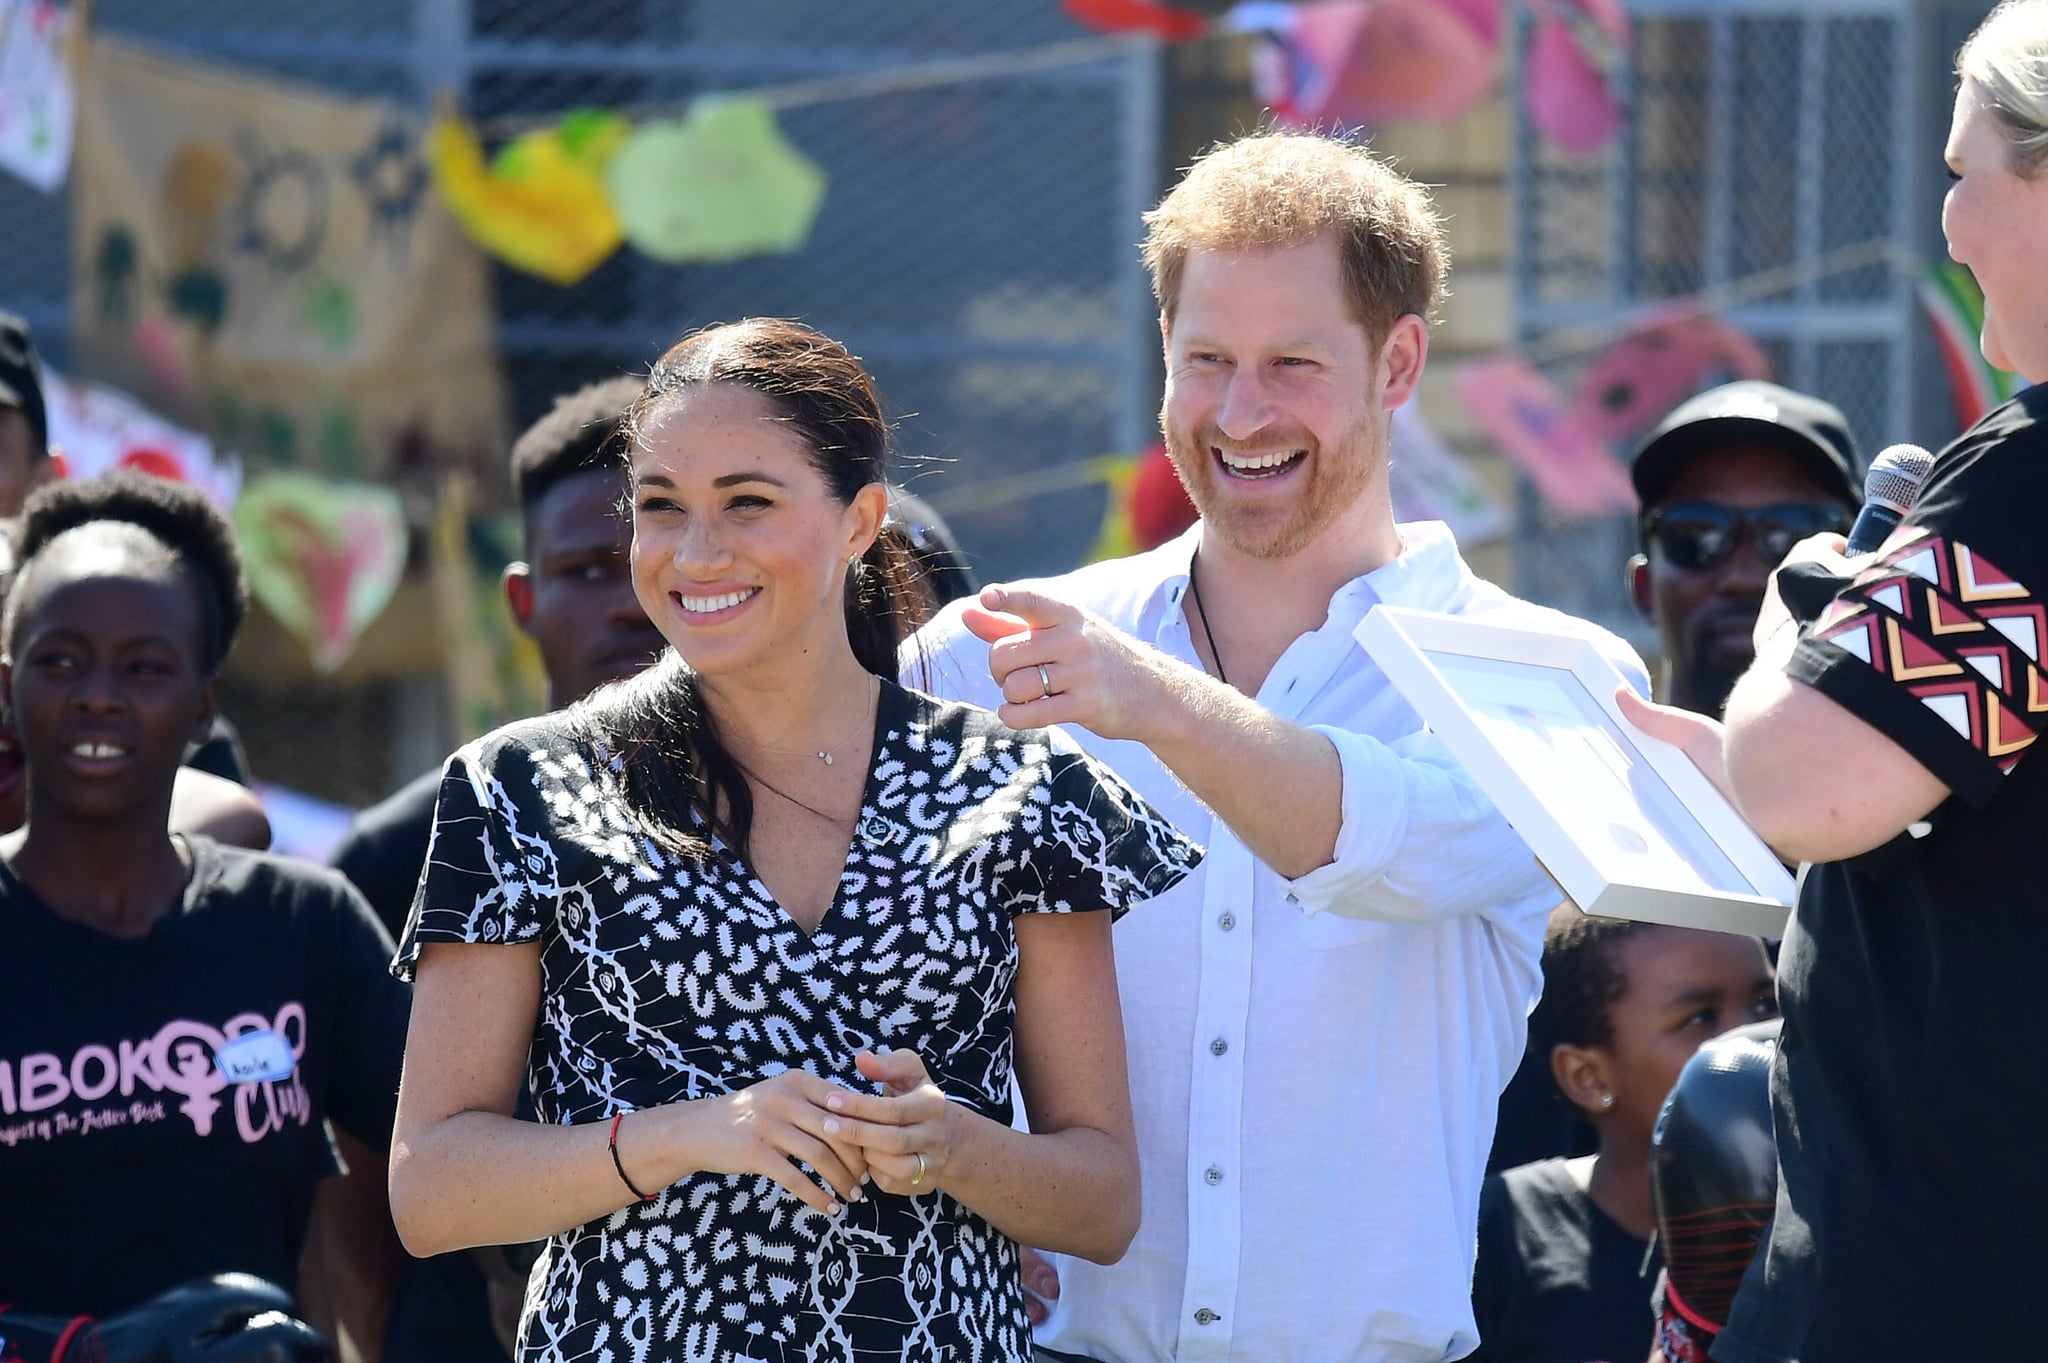 CAPE TOWN, SOUTH AFRICA - SEPTEMBER 23: Prince Harry, Duke of Sussex and Meghan, Duchess of Sussex visit a Justice Desk initiative, a workshop that teaches children about their rights, self-awareness and safety, in Nyanga township, during their royal tour of South Africa on September 23, 2019 in Cape Town, South Africa. (Photo by Samir Hussein/WireImage)